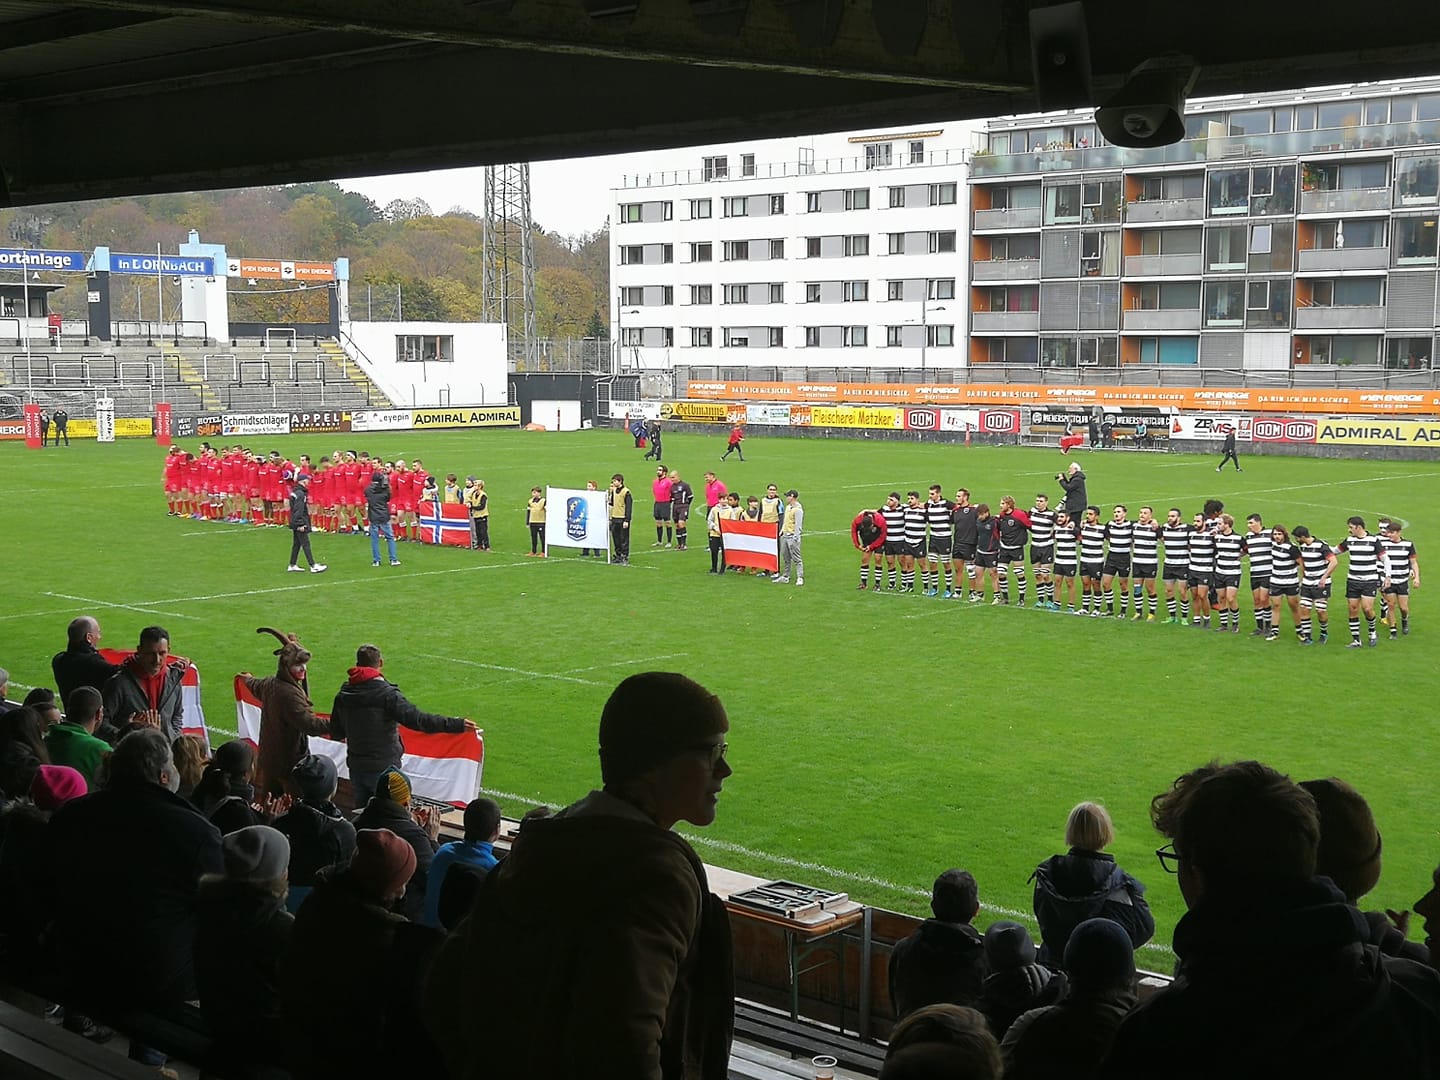 The teams line up for the national anthems